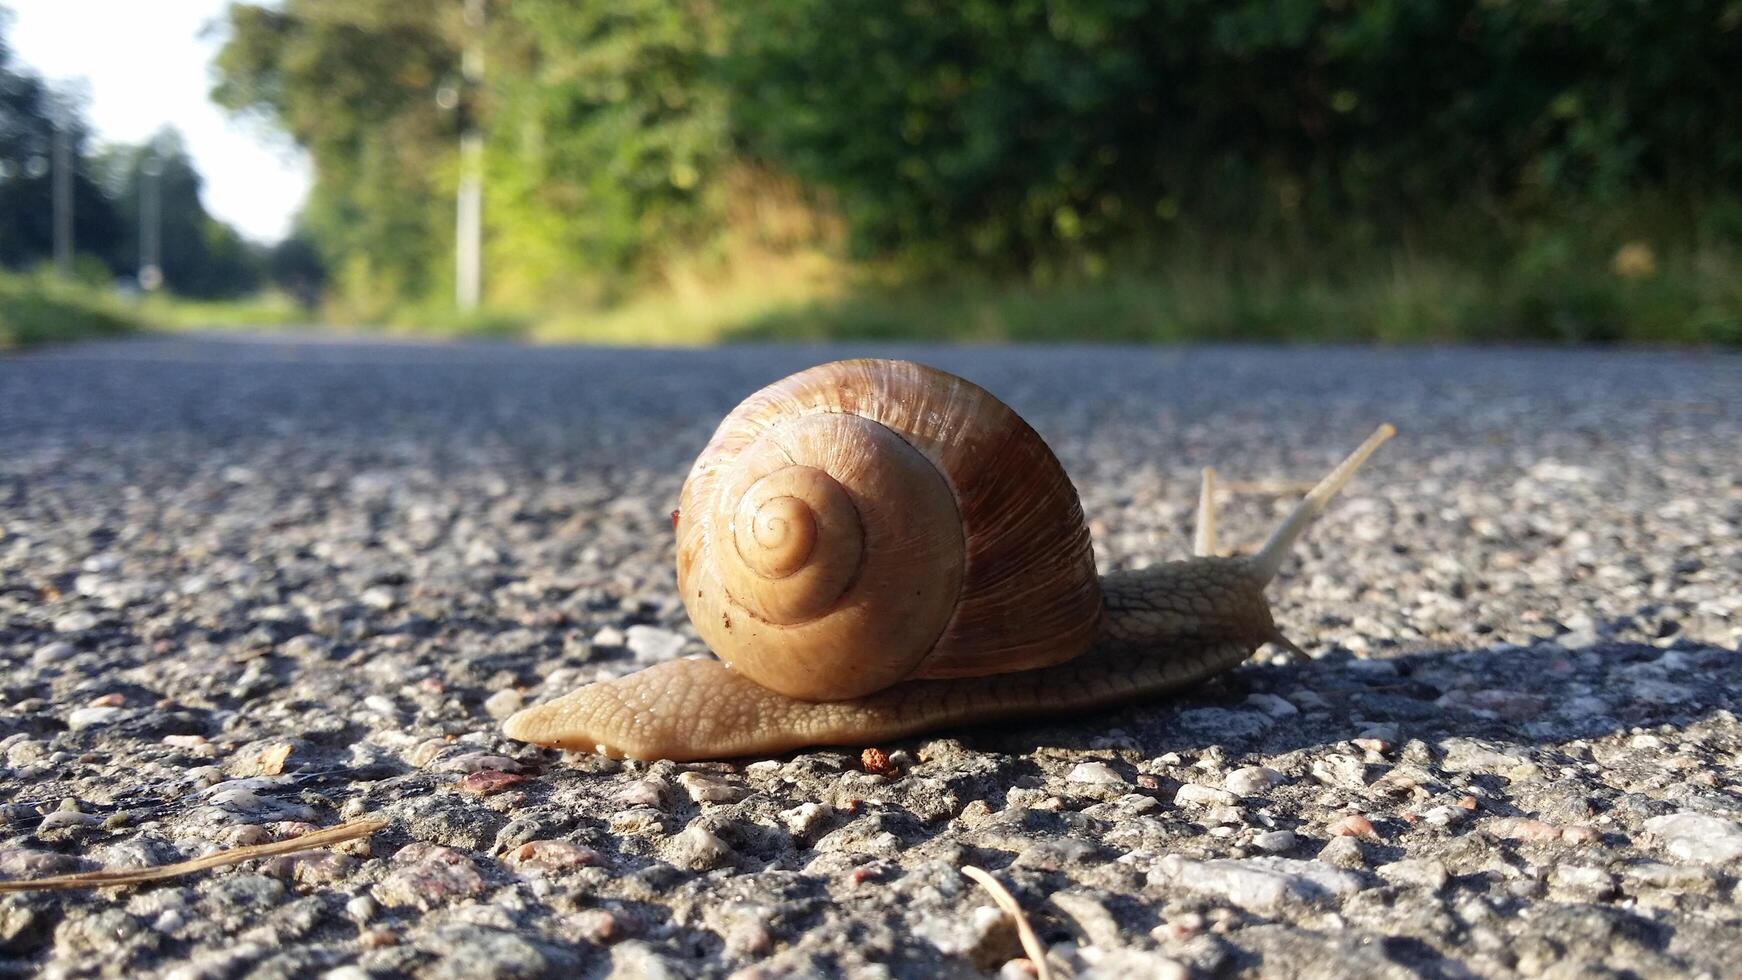 A snail in the middle of the street photo